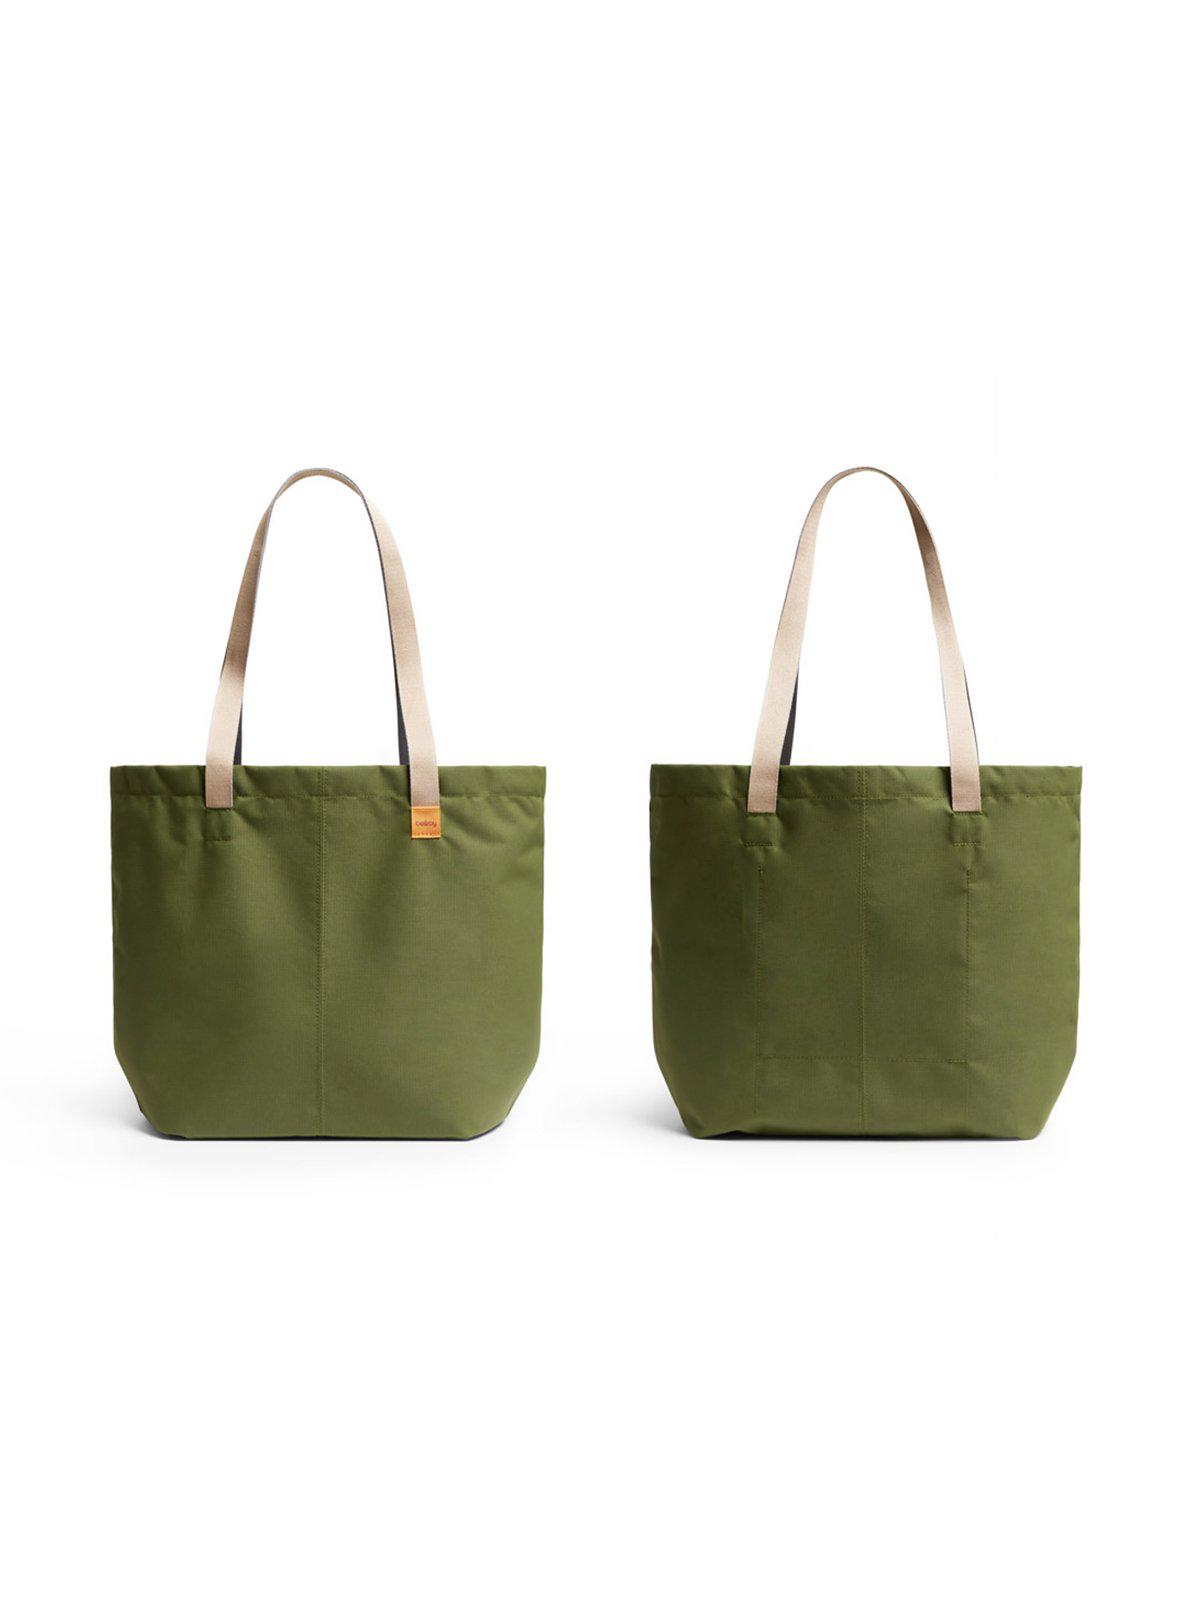 Bellroy Market Tote Ranger Green (Leather-free)